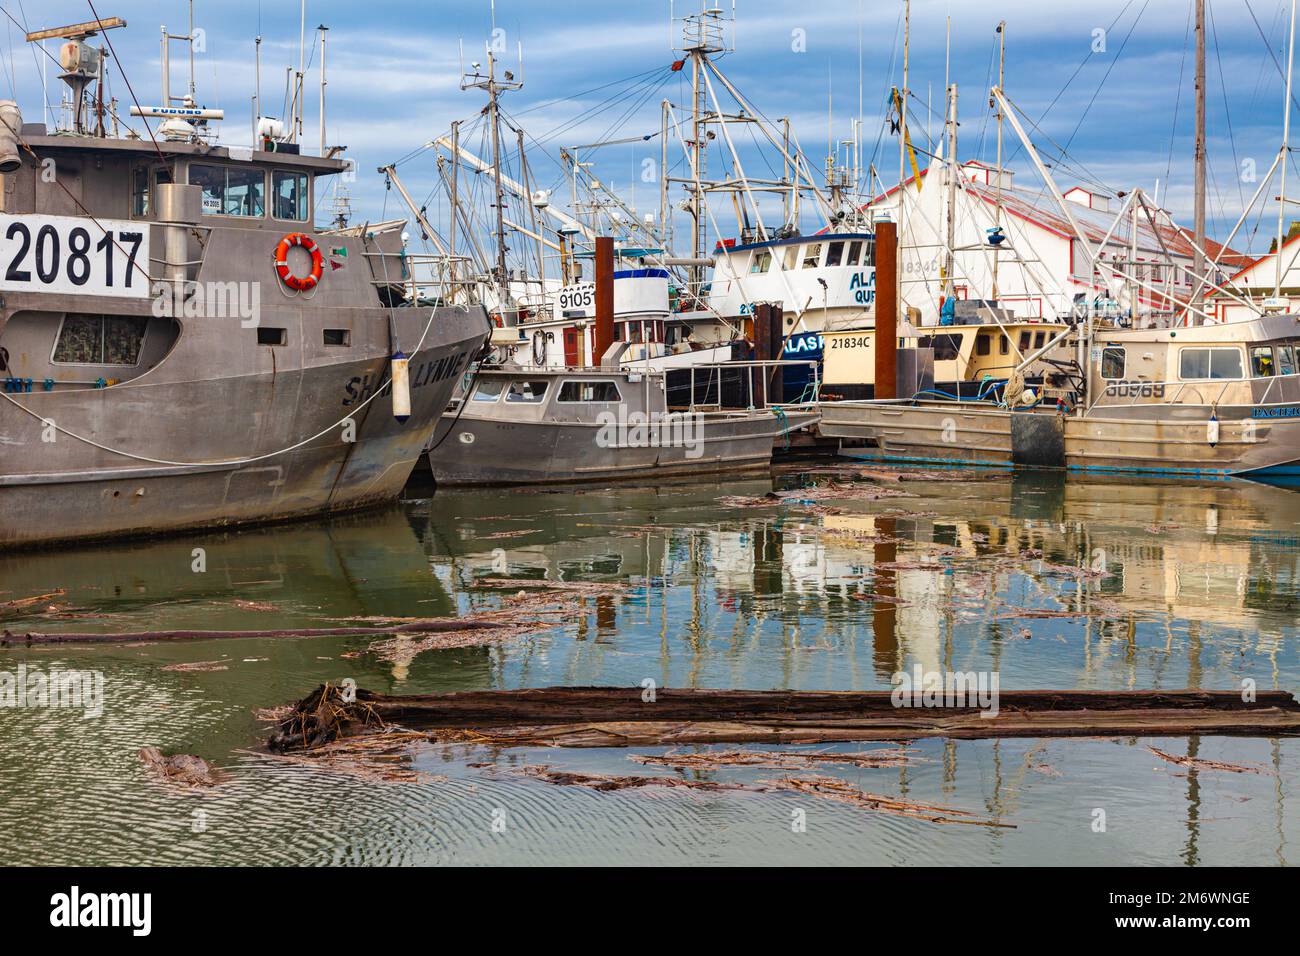 Floating debris after a storm in Steveston Harbour British Columbia Canada Stock Photo